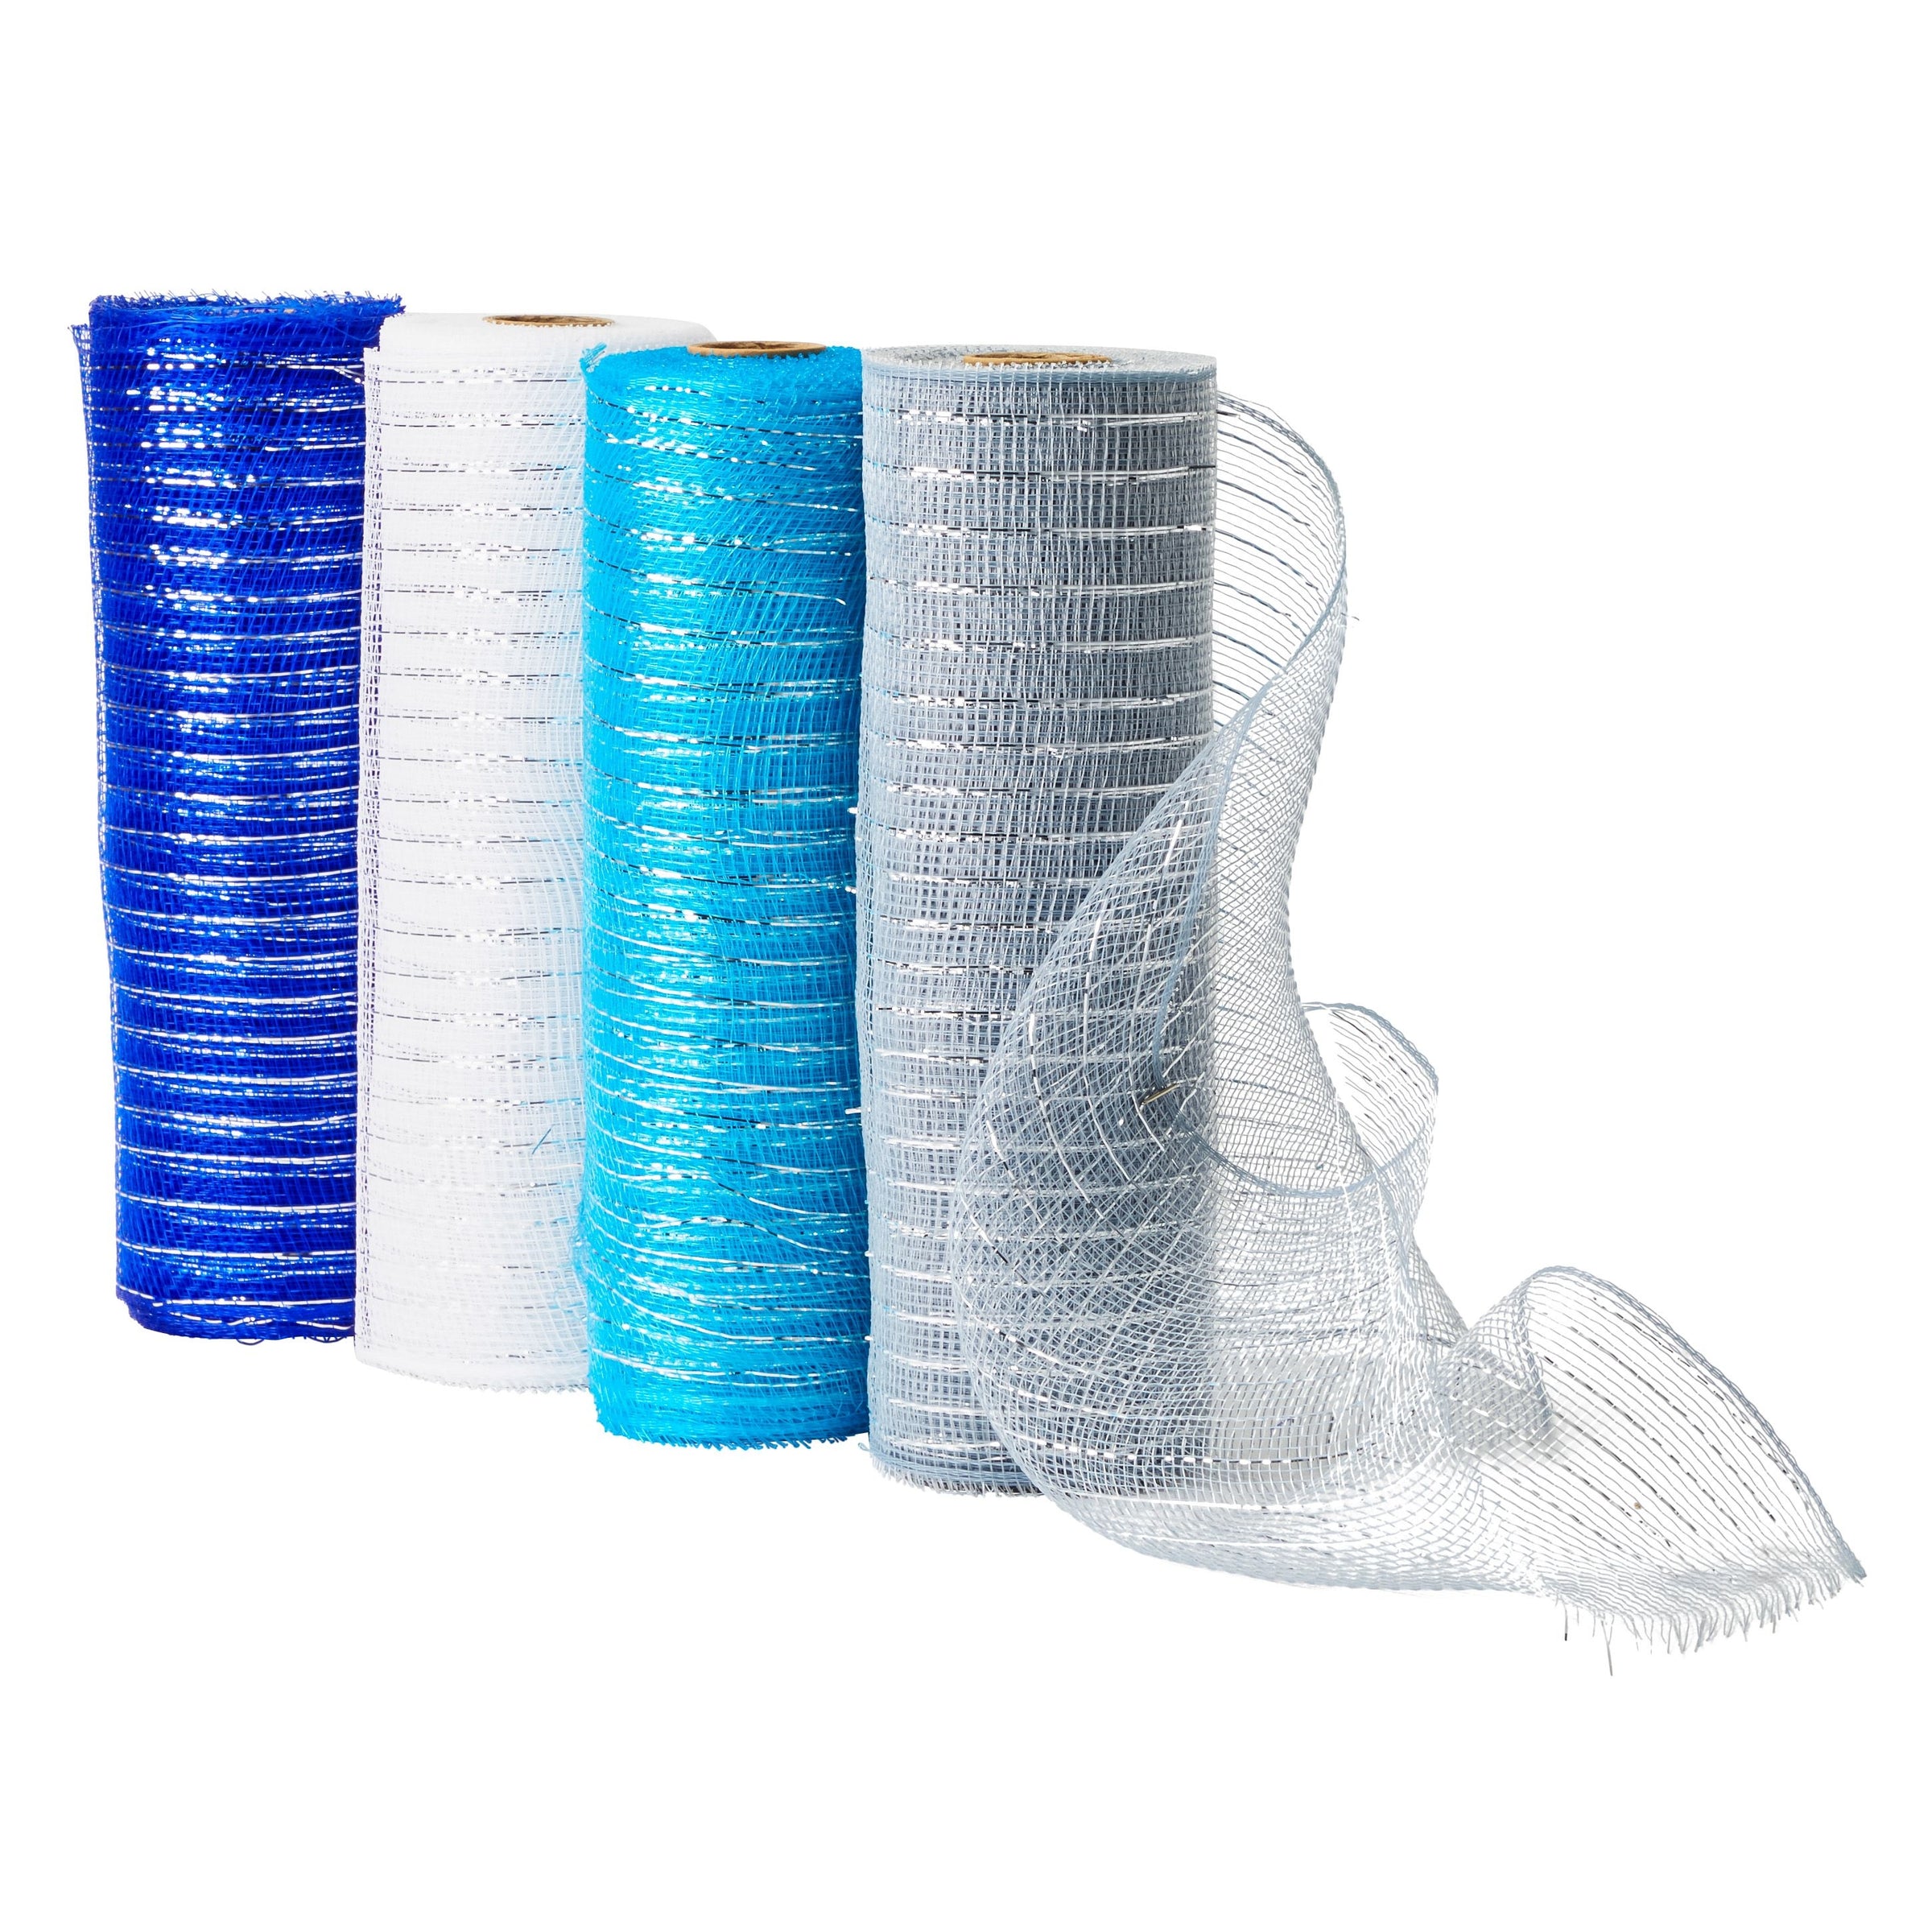 4 Pack 10 inch Deco Mesh Ribbon Rolls for Crafts, Metallic Poly Burlap in Blue/silver/white/royal Blue (30 Ft/10 Yards)